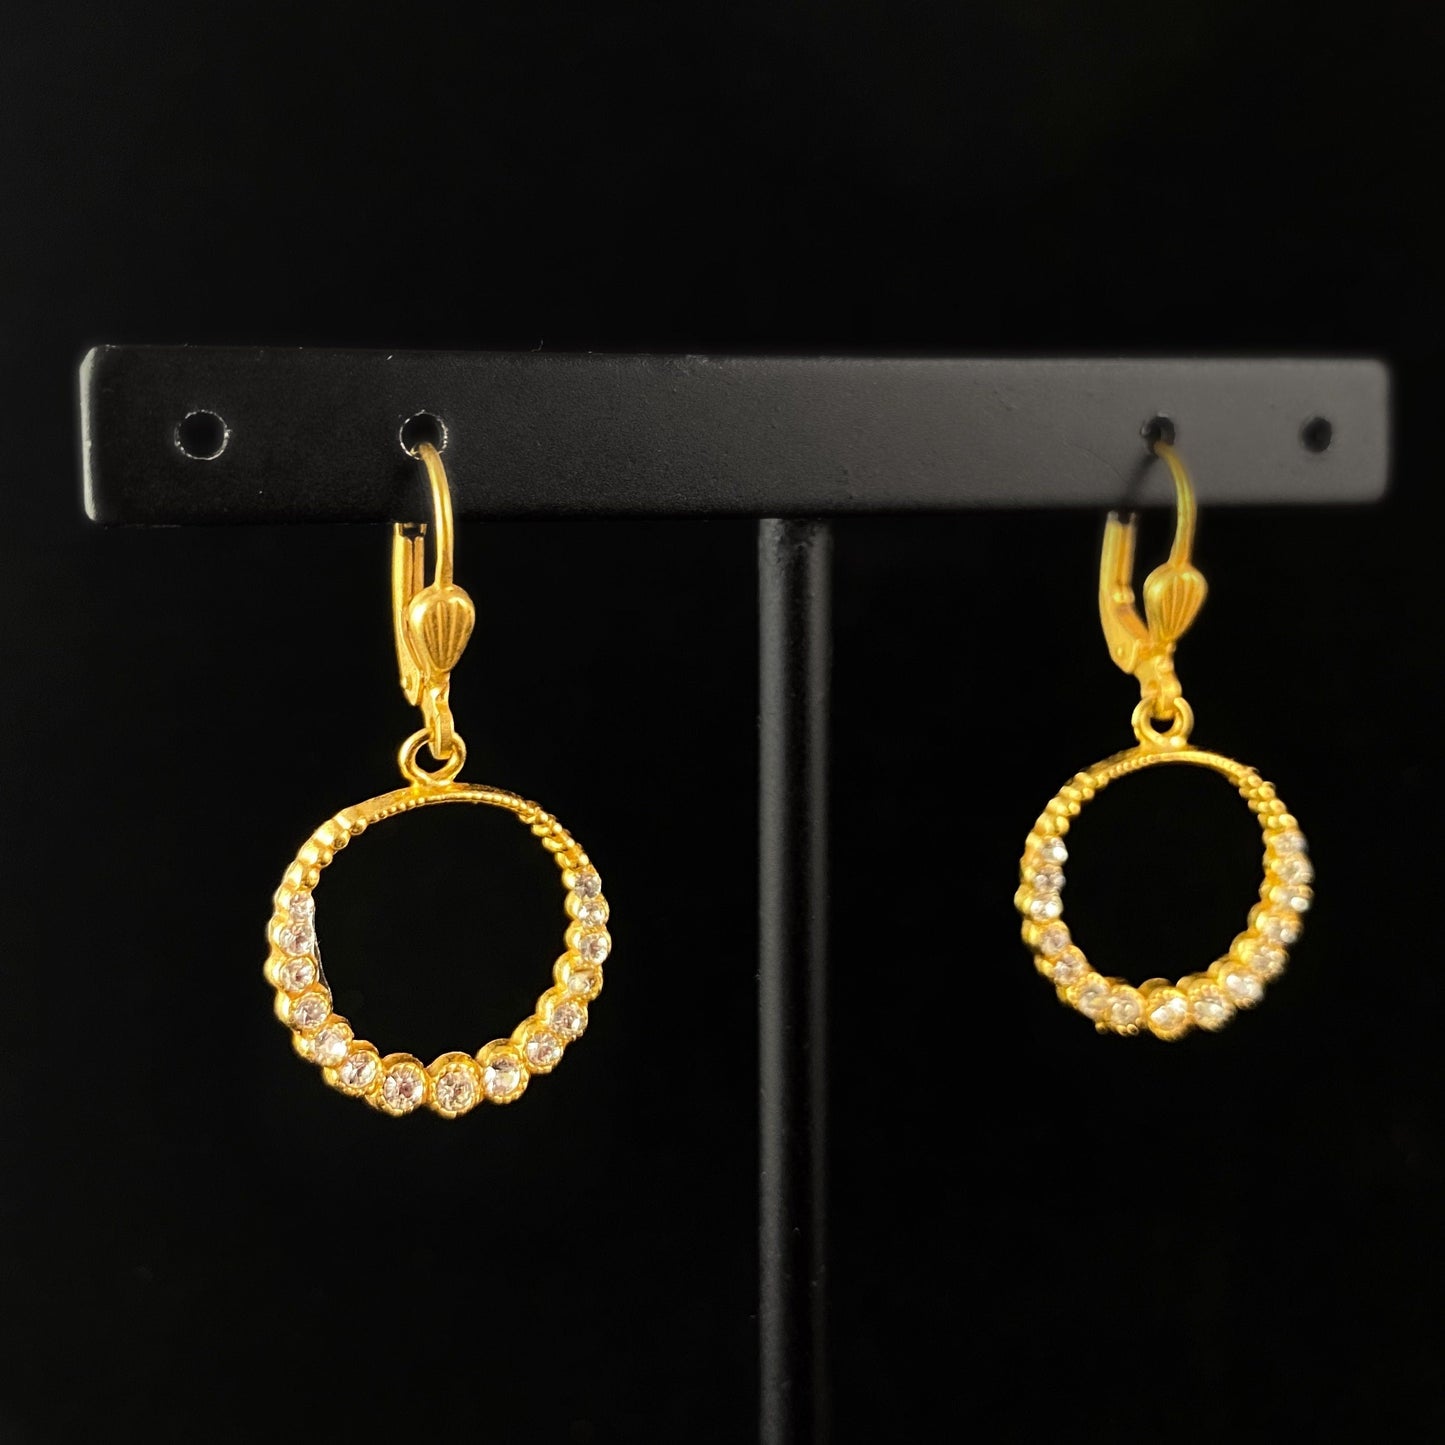 Gold Circle Earrings with Clear Swarovski Crystals - La Vie Parisienne by Catherine Popesco